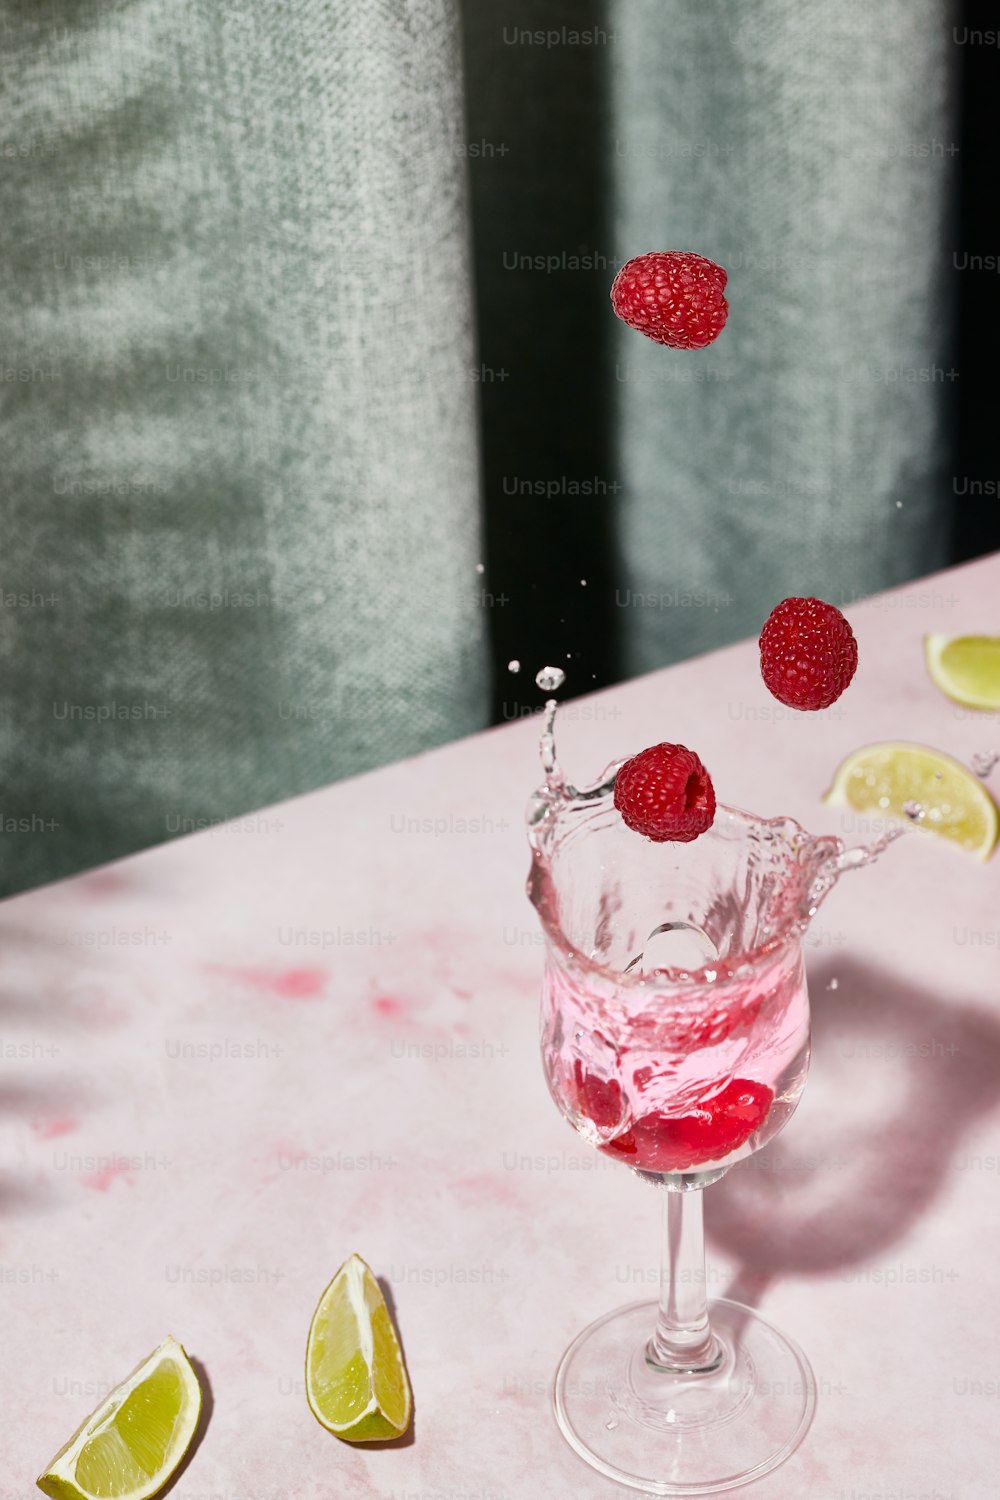 a glass filled with a pink liquid and topped with raspberries